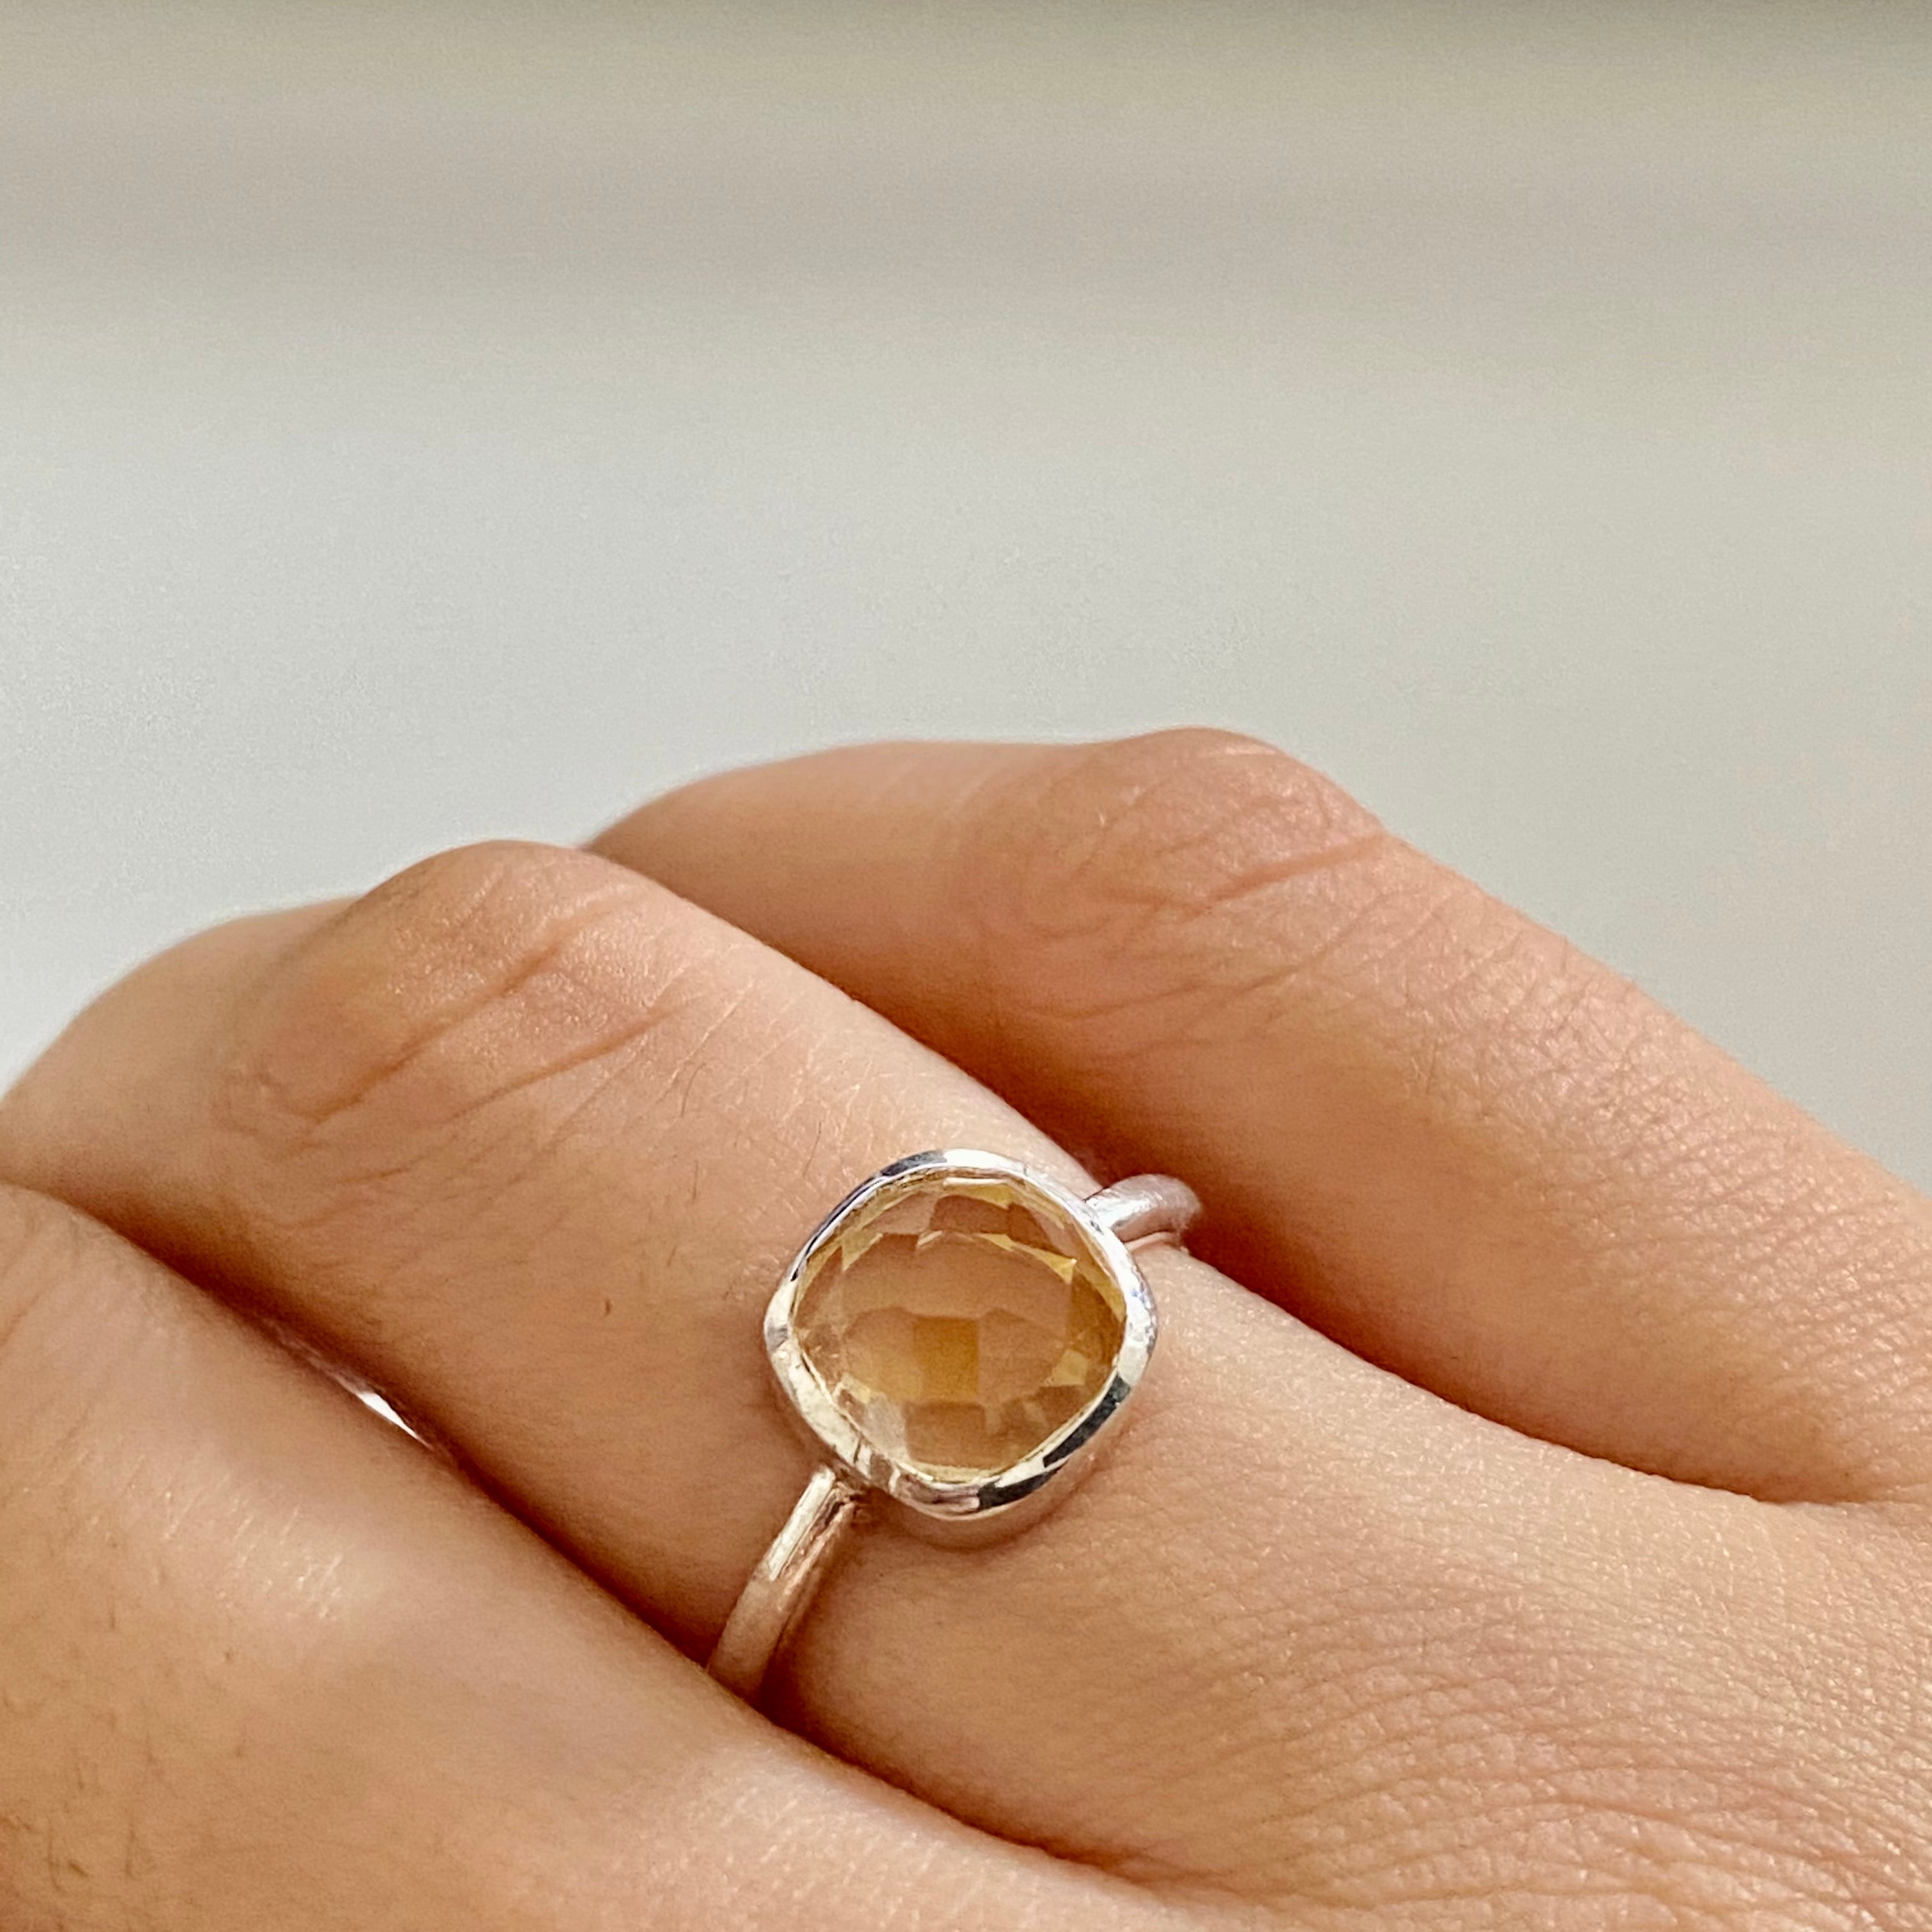 Faceted Square Cut Natural Gemstone Sterling Silver Solitaire Ring - Citrine